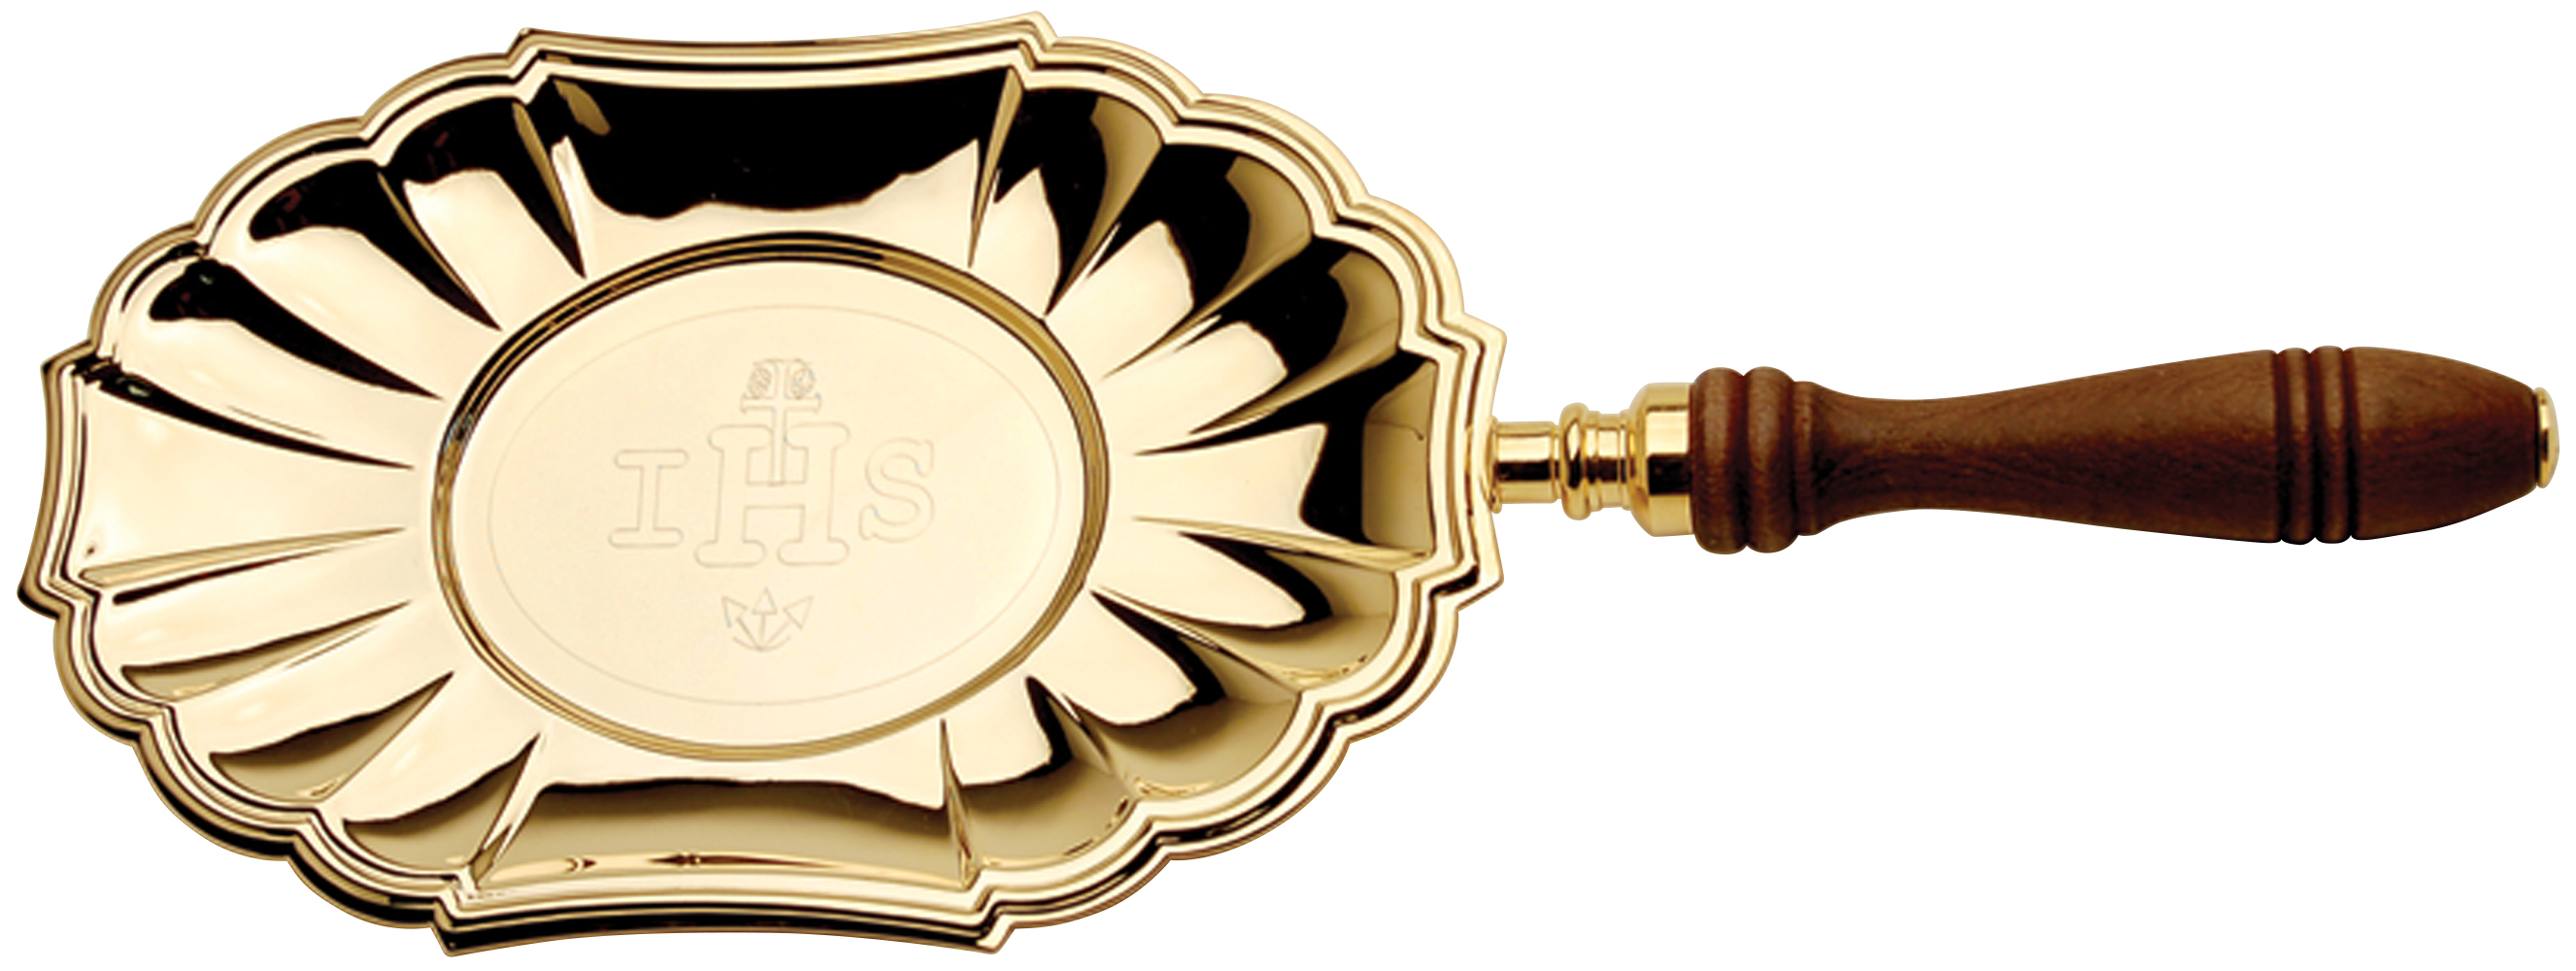 Communion Paten with Handle 5.75 x 8.75 Gold Plate K582